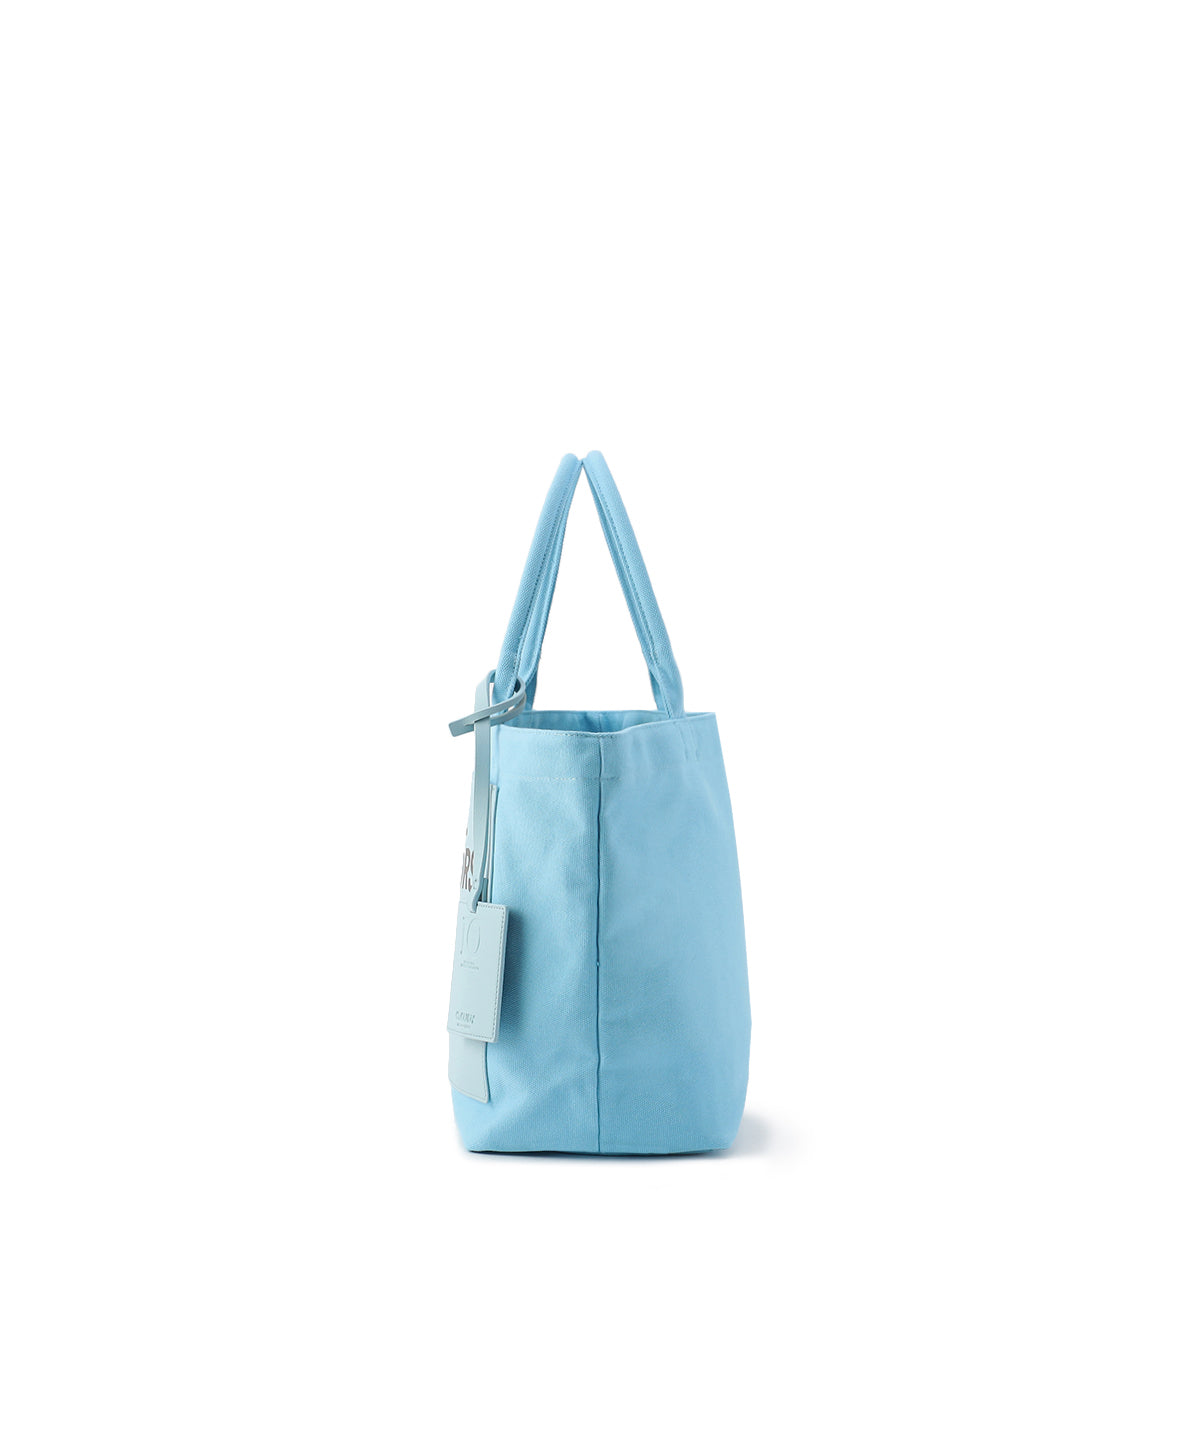 Colored Canvas Tote (Medium) SAX | バッグ | CLOUDY公式通販サイト